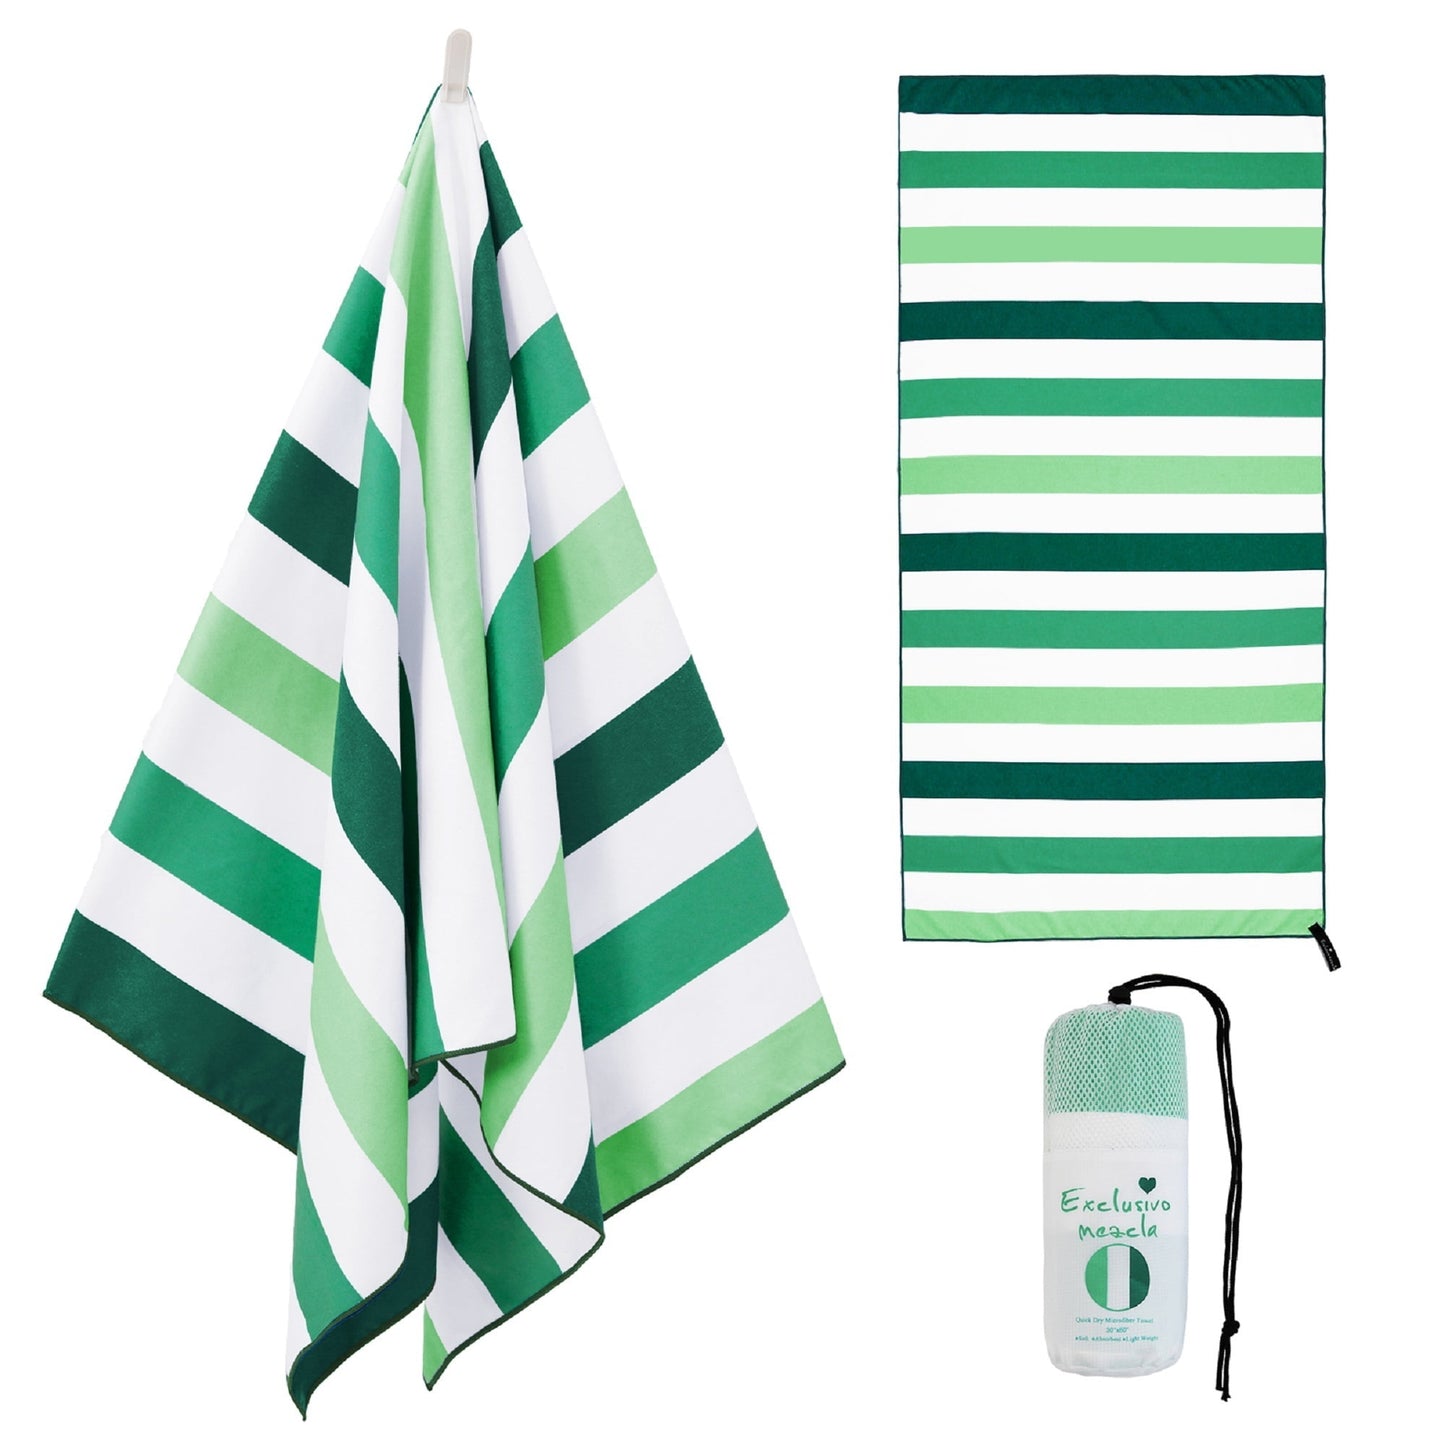 Exclusivo Mezcla Microfiber Quick Dry Beach Towel, Large Sand Free Beach Towel for Travel/Camping/Sports (Striped Forest Green, 30"X60") - Super Absorbent, Compact and Lightweight